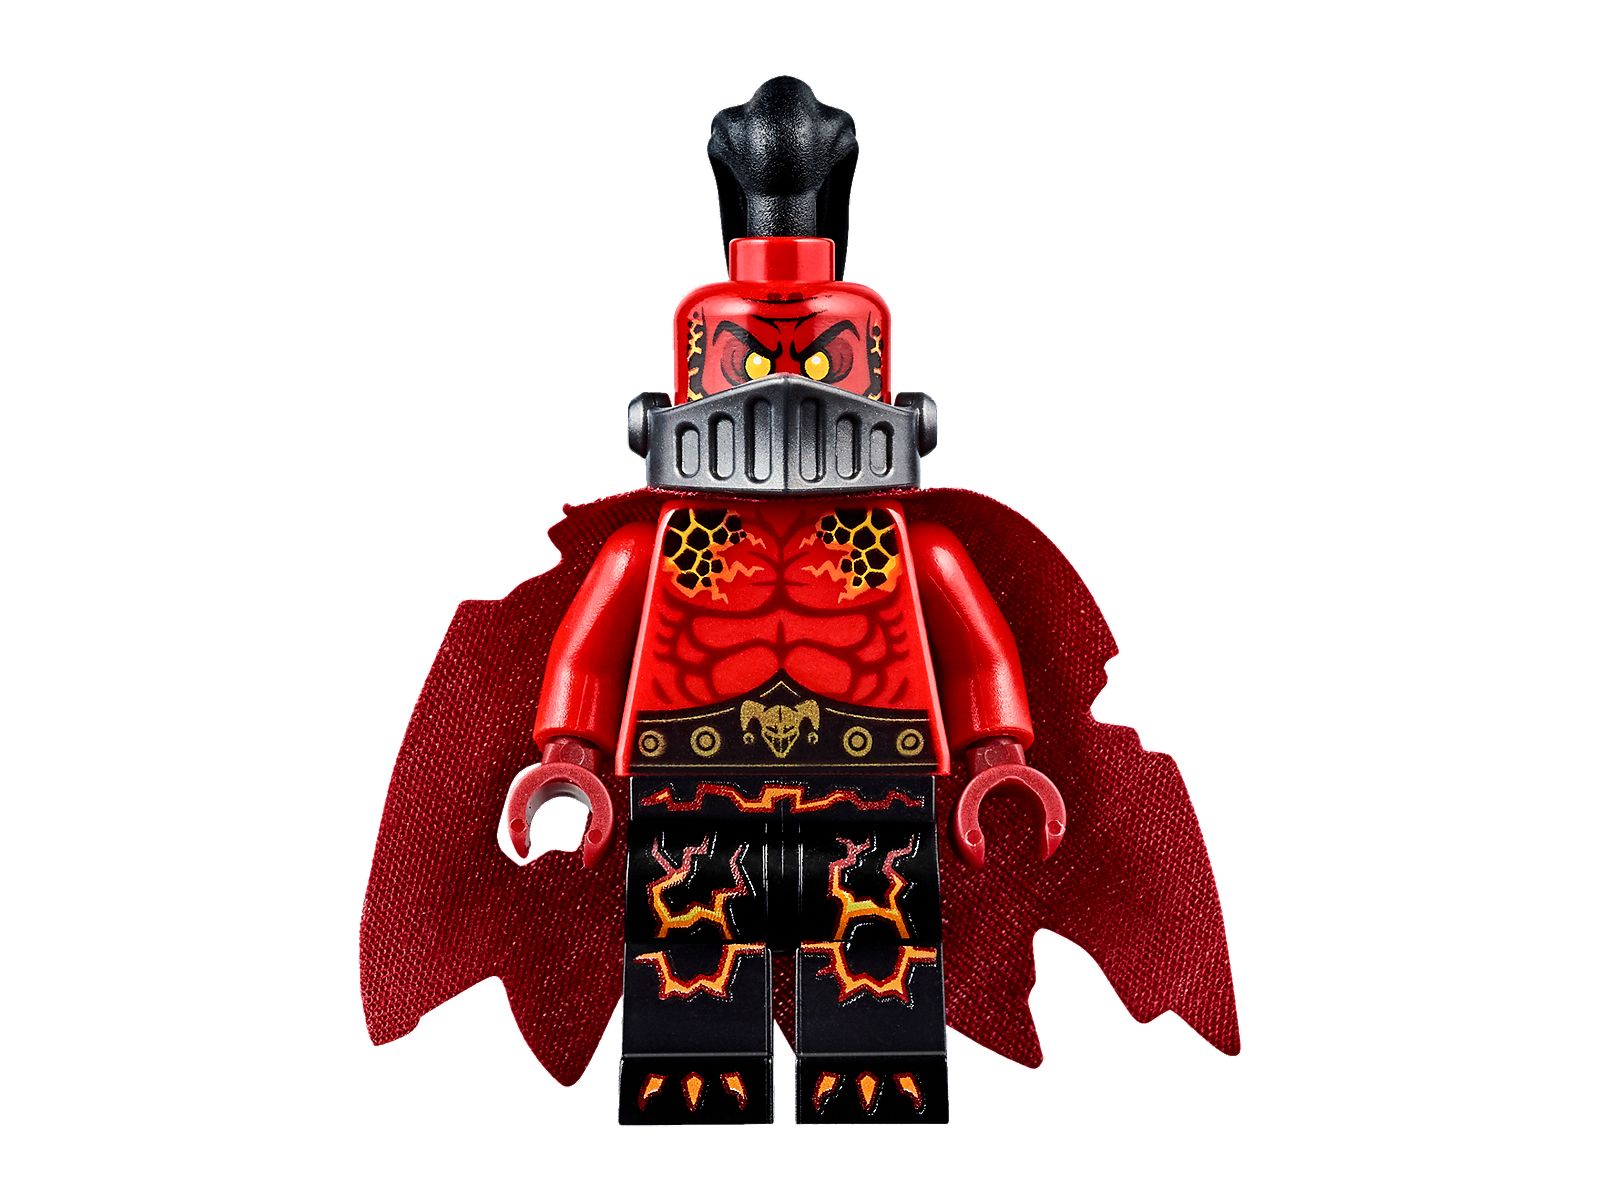 46-new-nexo-knights-minifigures-posted-to-lego-site-last-night